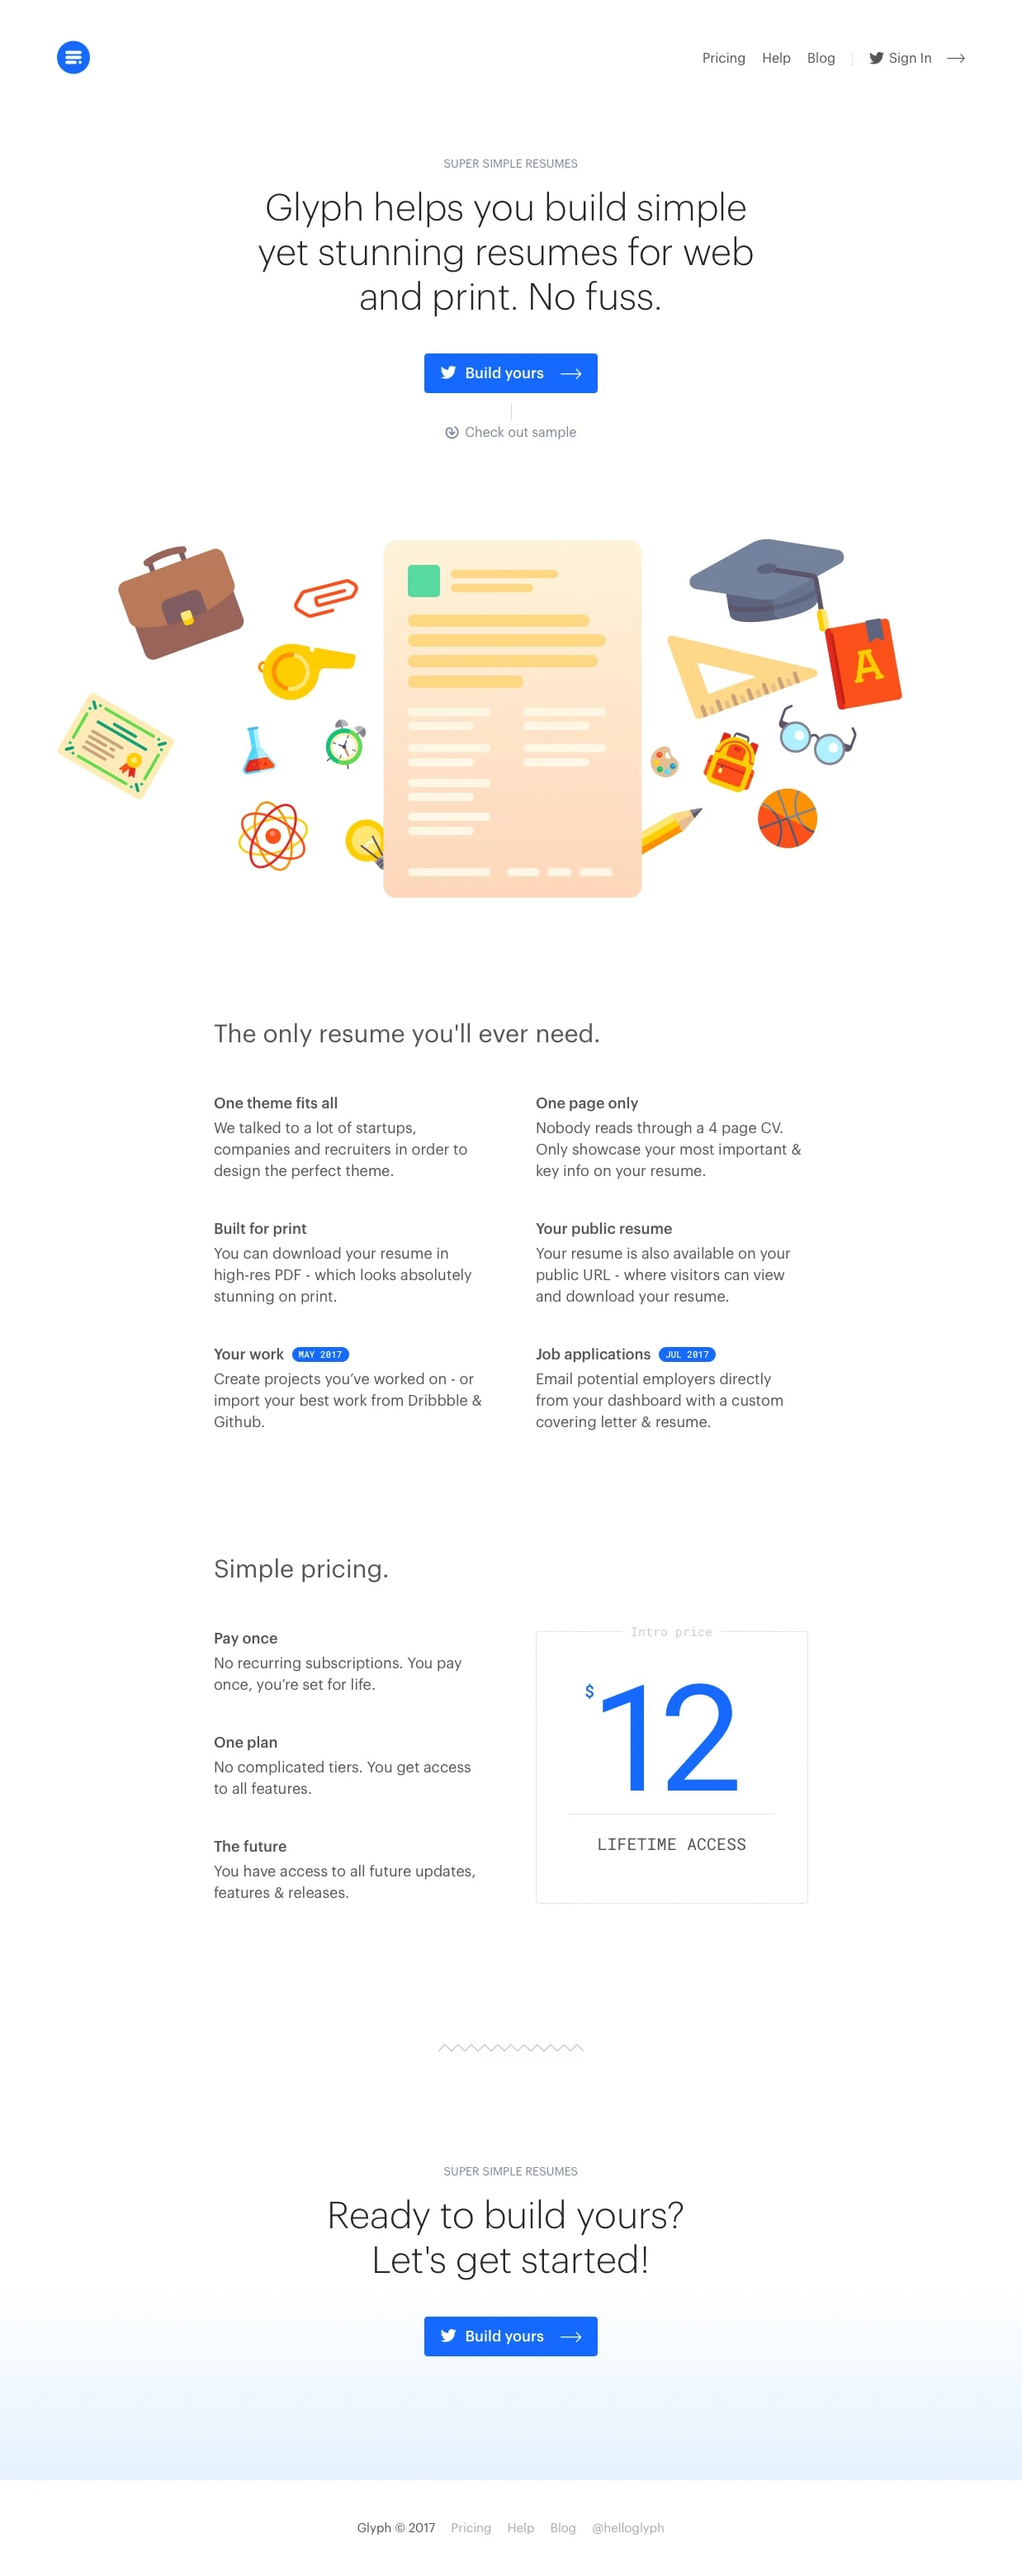 Glyph Landing Page Example: Glyph helps you build simple yet stunning resumes for web and print. No fuss.